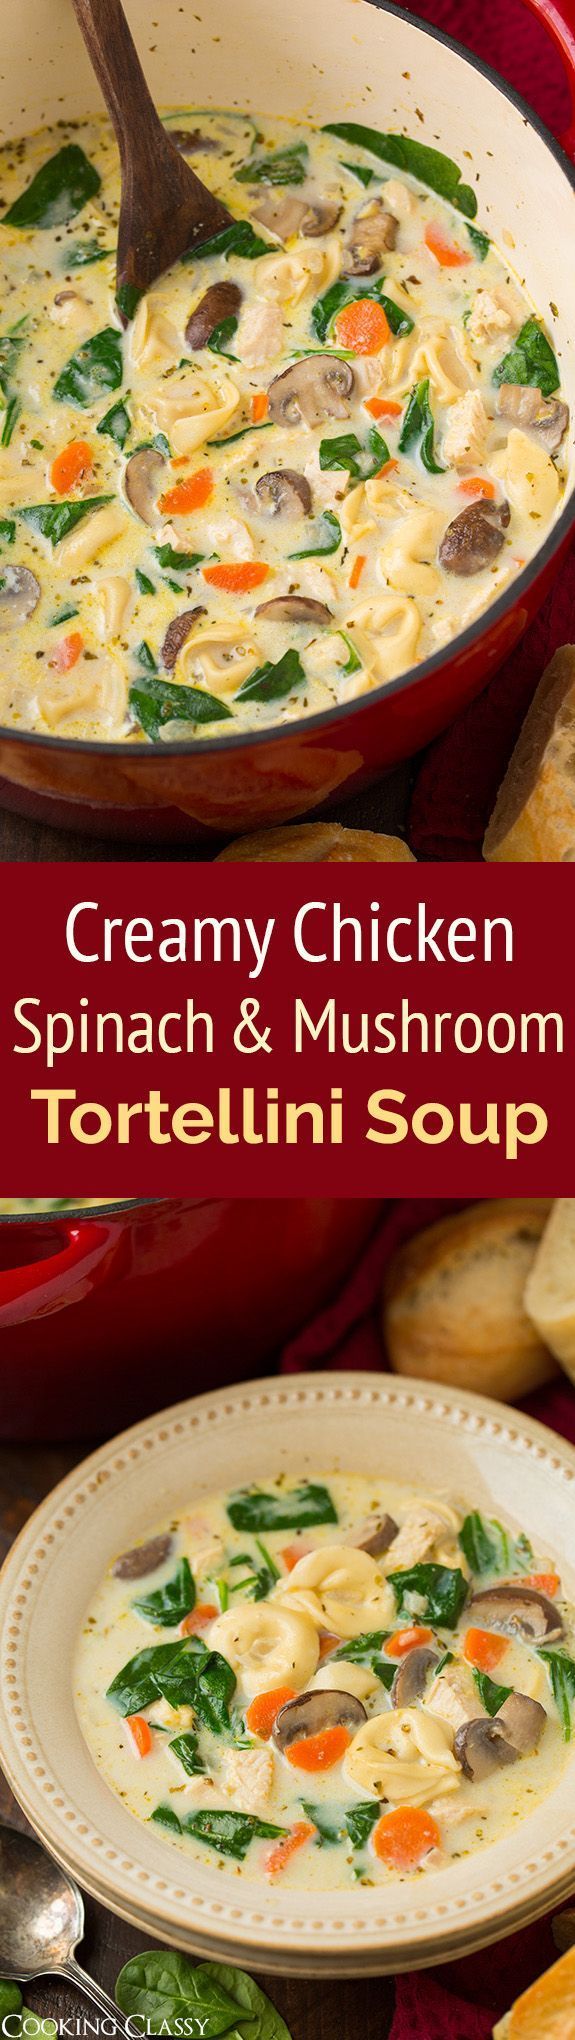 Creamy Chicken, Spinach and Mushroom Tortellini Soup – this hearty, comforting soup does not disappoin